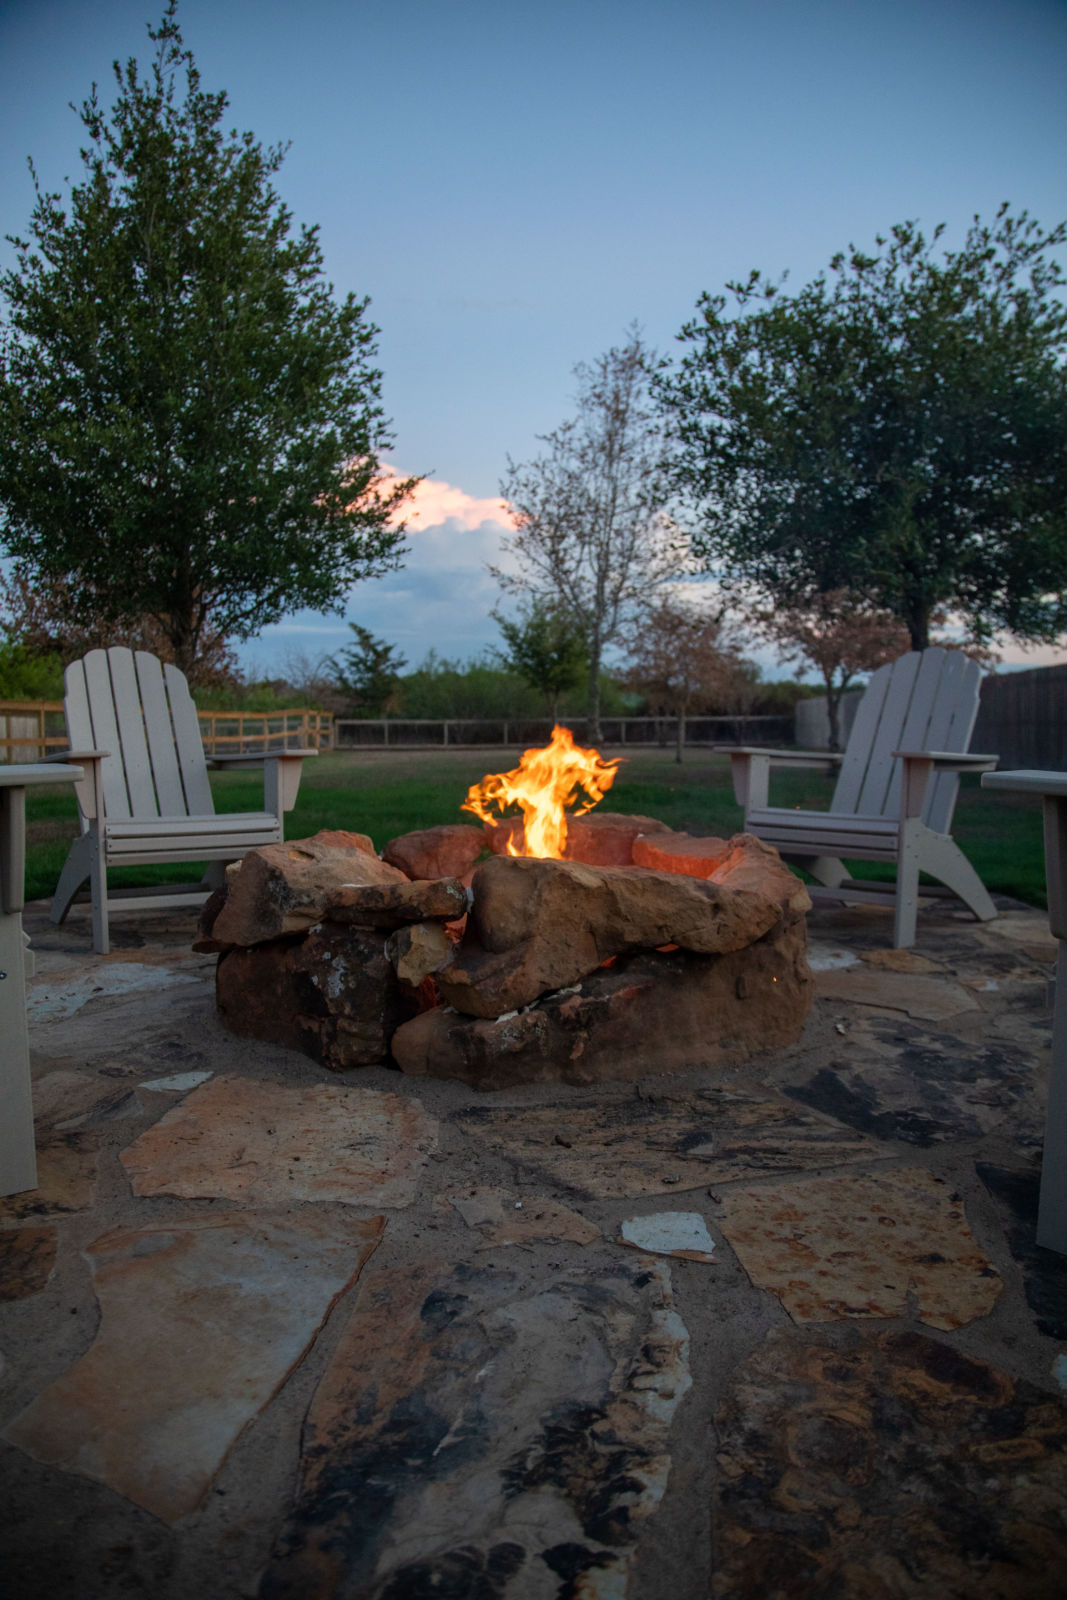 alt="outdoor fireplace with fire in fire pit in the evening surrounded by chairs"